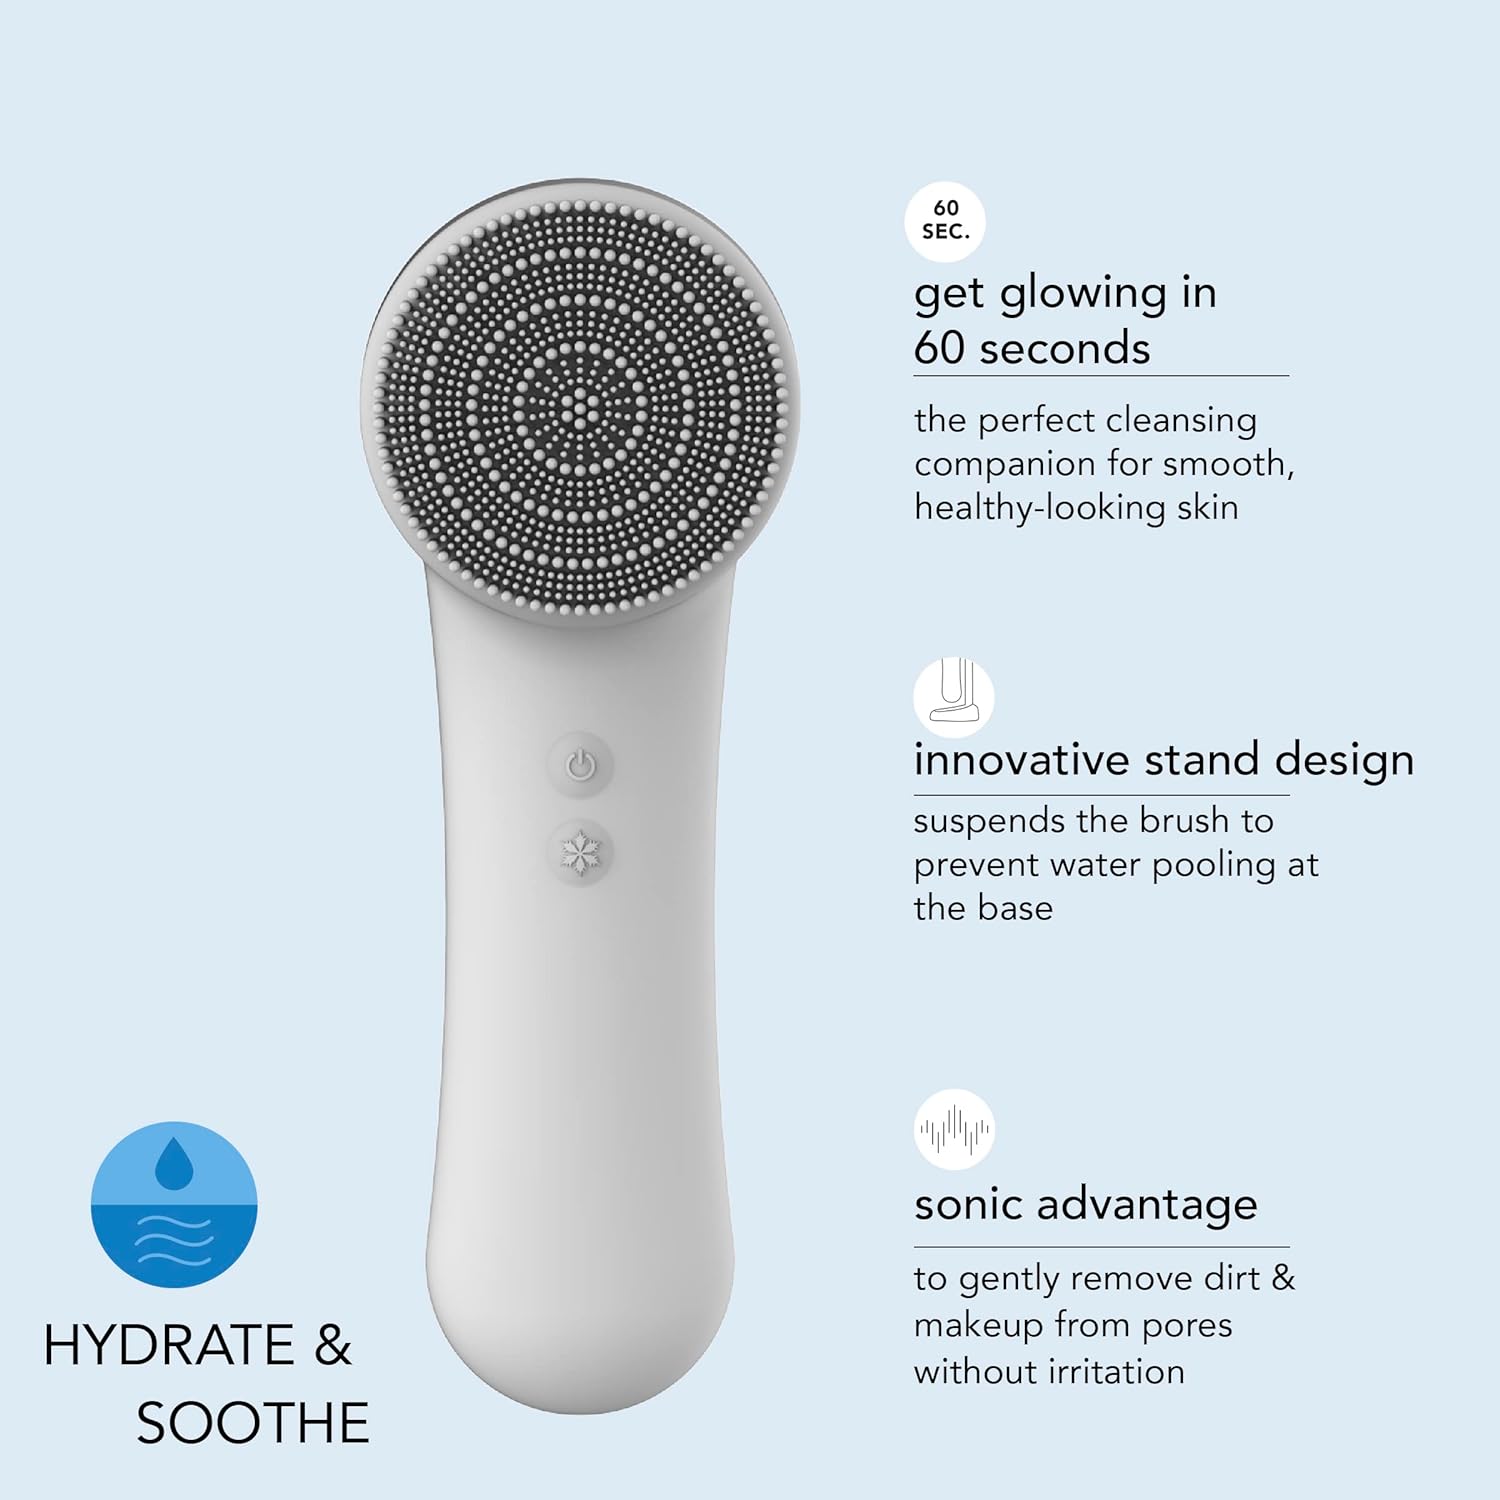 skn by conair Cryotherapy Advanced Facial Cleansing Brush, Featuring Ultra-Hygienic Silicone Brush Head and Cool Plate to Help Soothe Inflammation and Reduce Puffiness